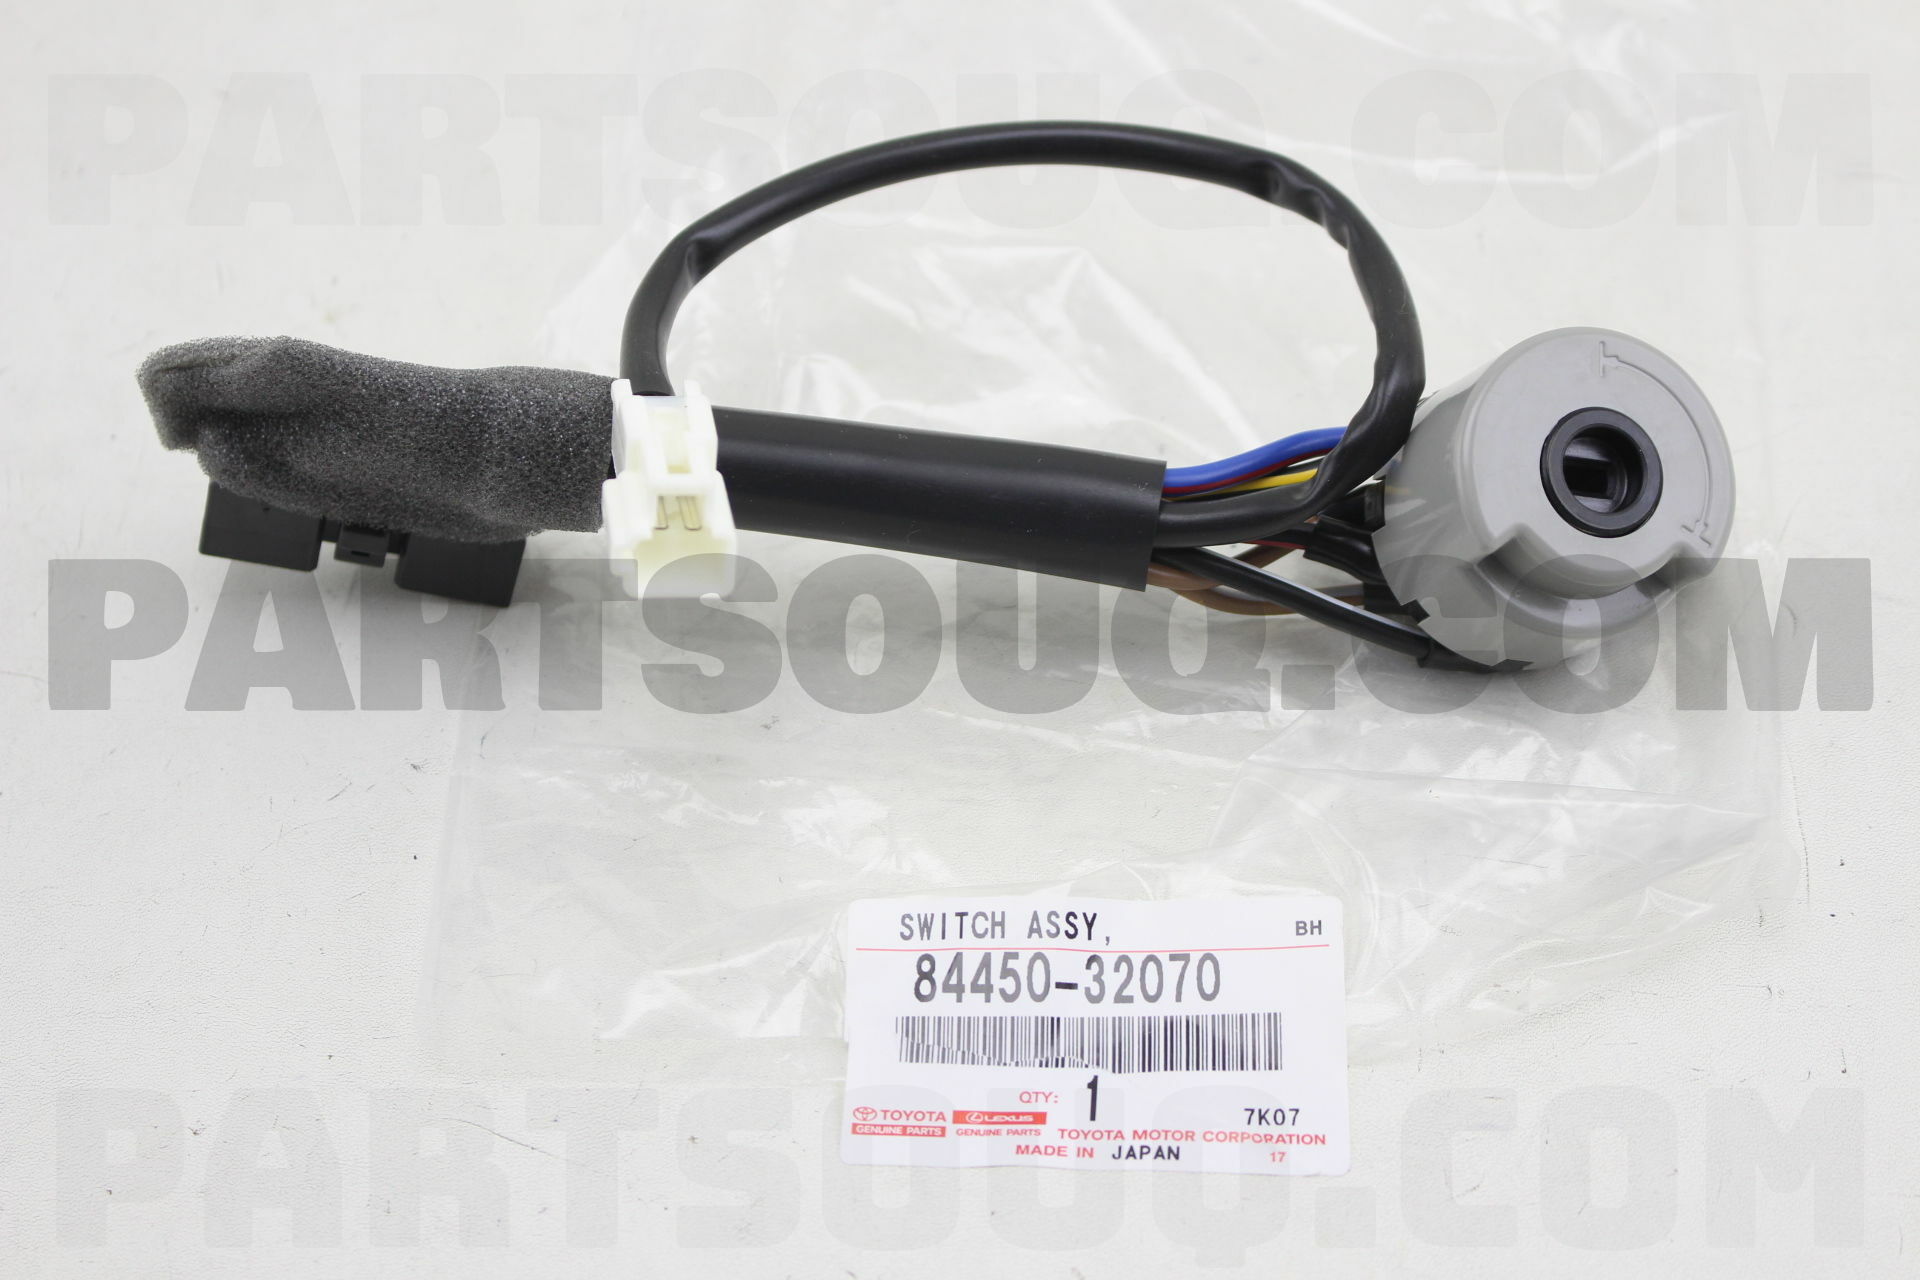 SWITCH ASSY, IGNITION OR STARTER 8445032070 | Toyota Parts | PartSouq